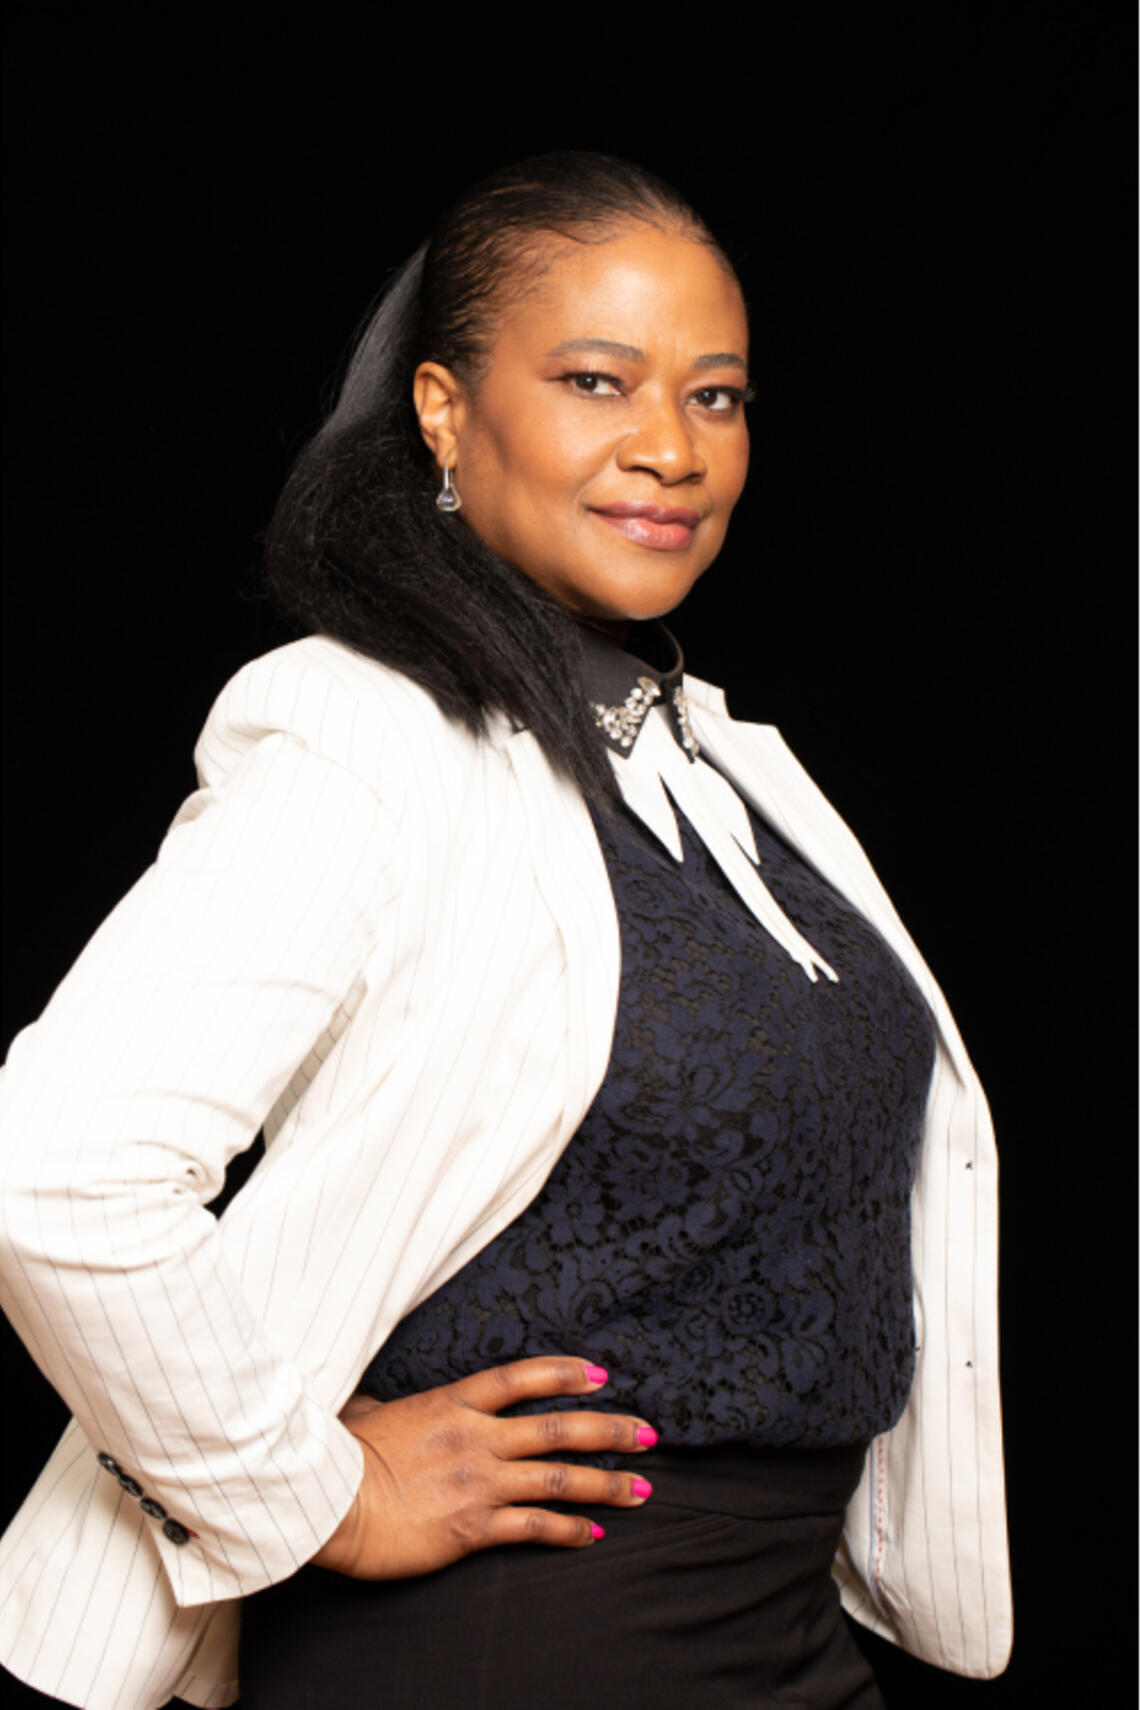 Althea Francis, BA’95, LLB’99, General Counsel at Public Prosecution Service of Canada